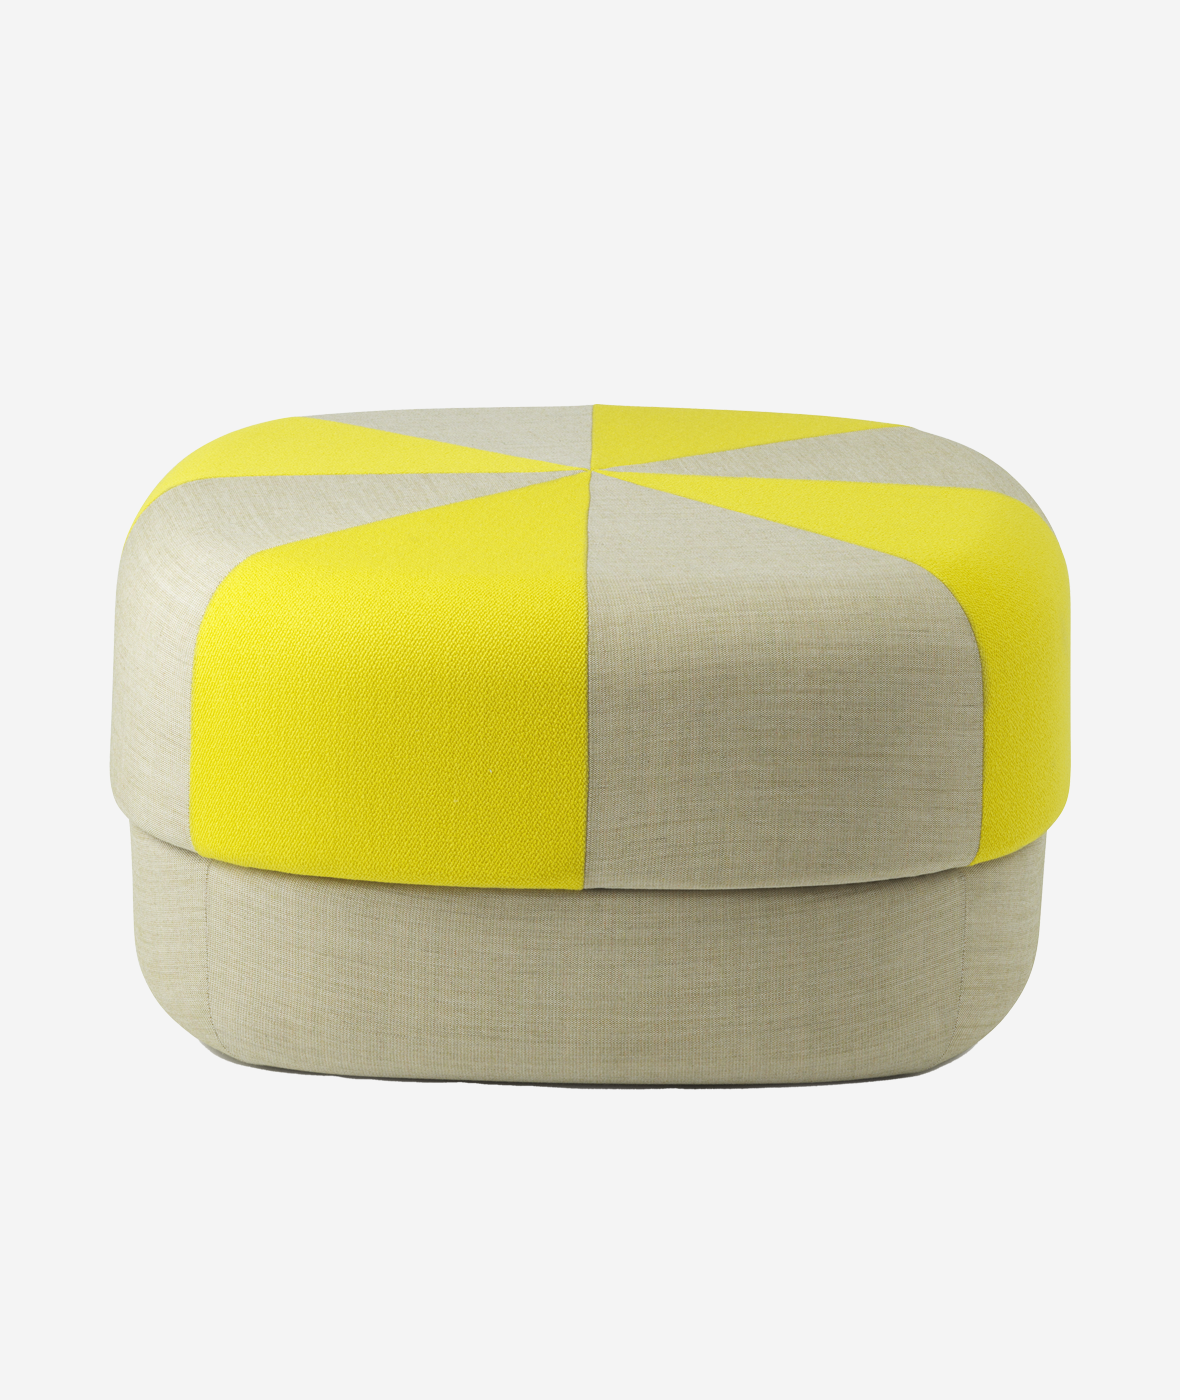 Circus Pouf Duo - More Options